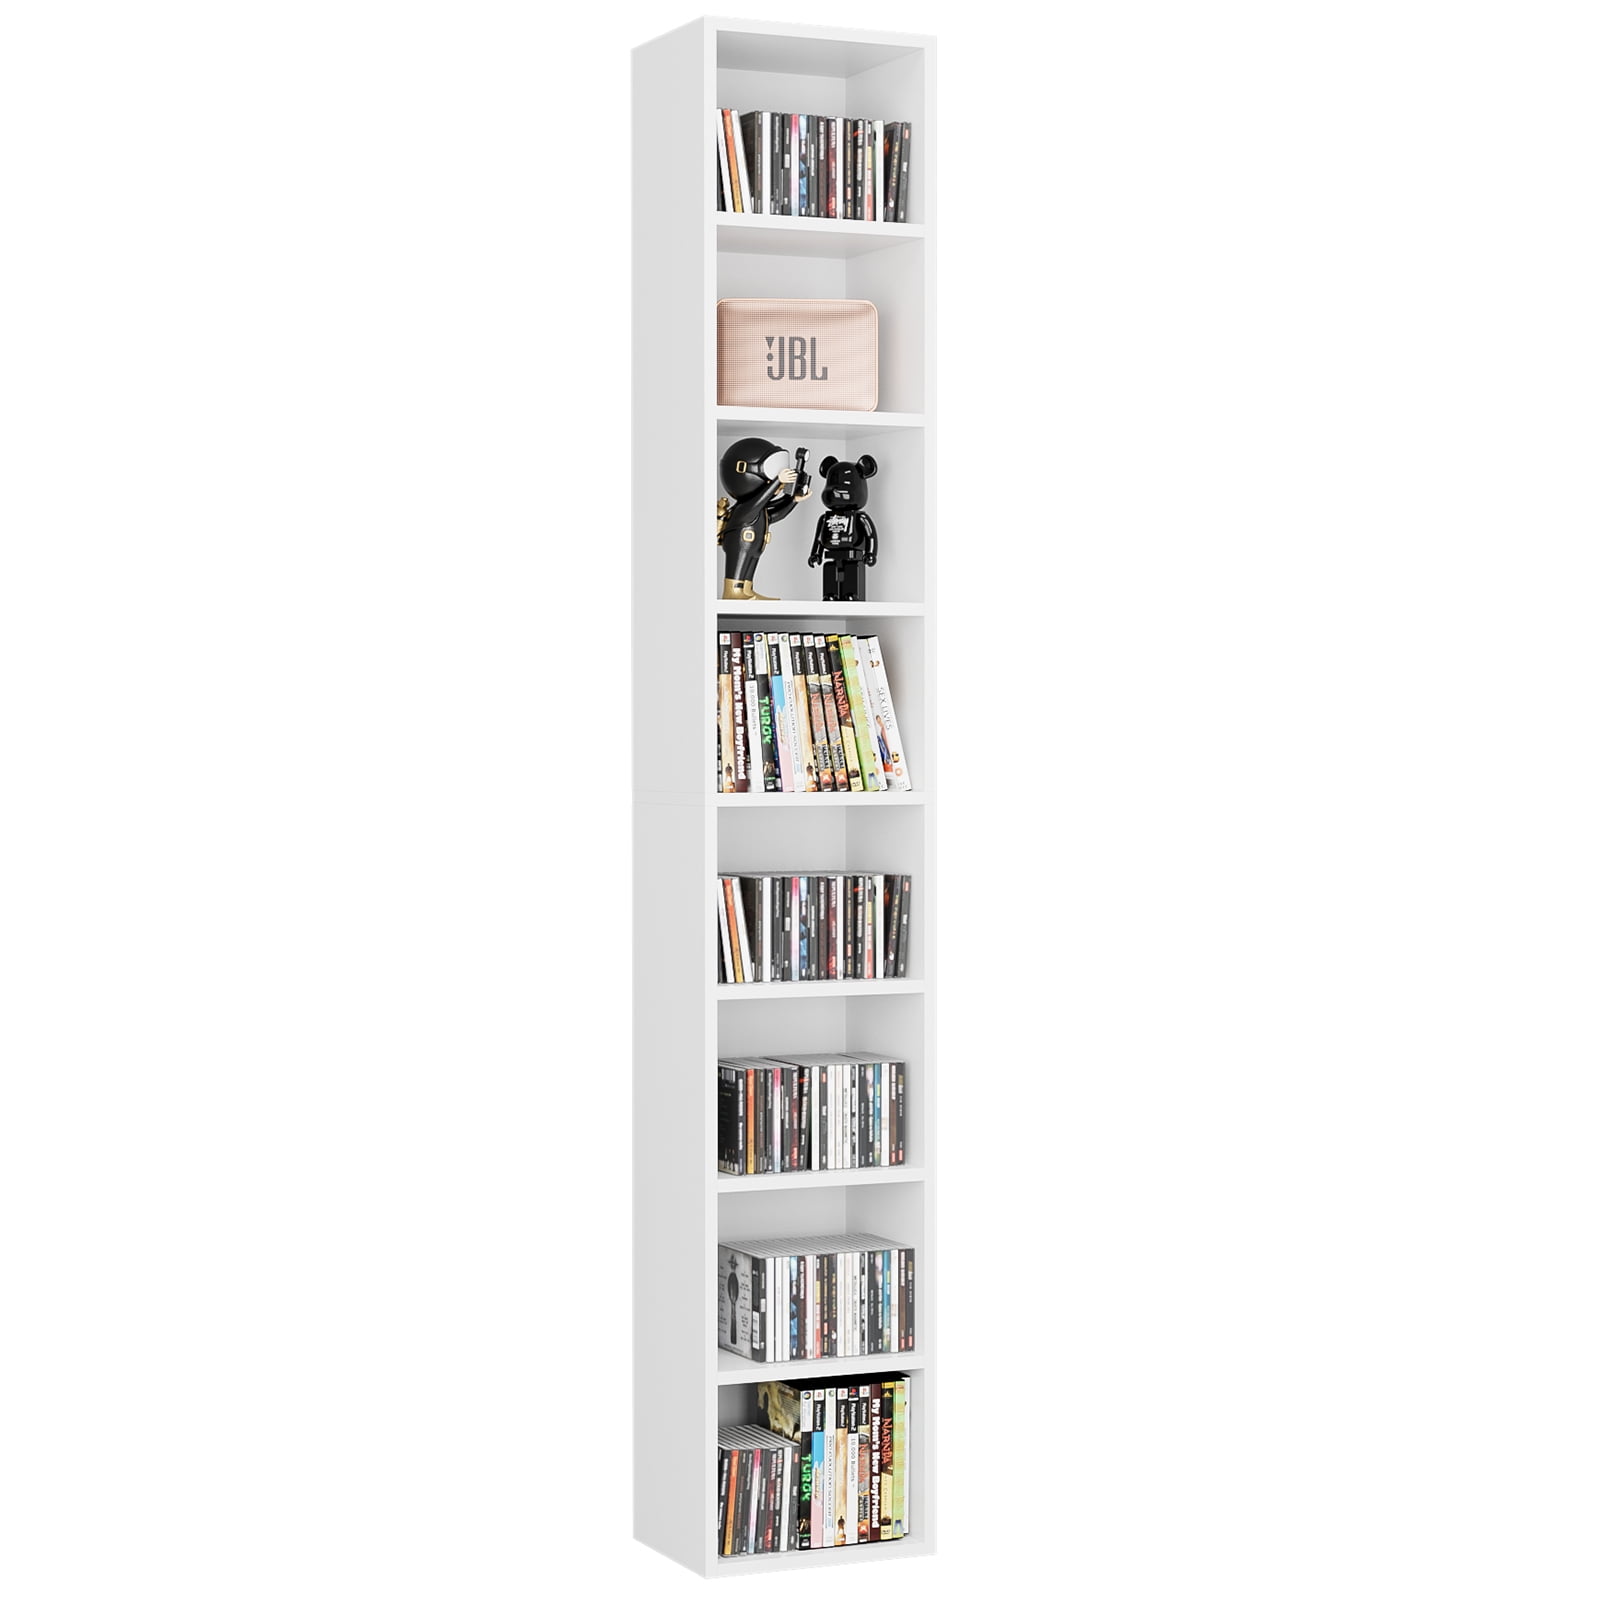 Homfa 8-Tier Media Tower, CD DVD Storage Unit with 4 and 3 Shelves for Living Room Bedroom, White Walmart.com